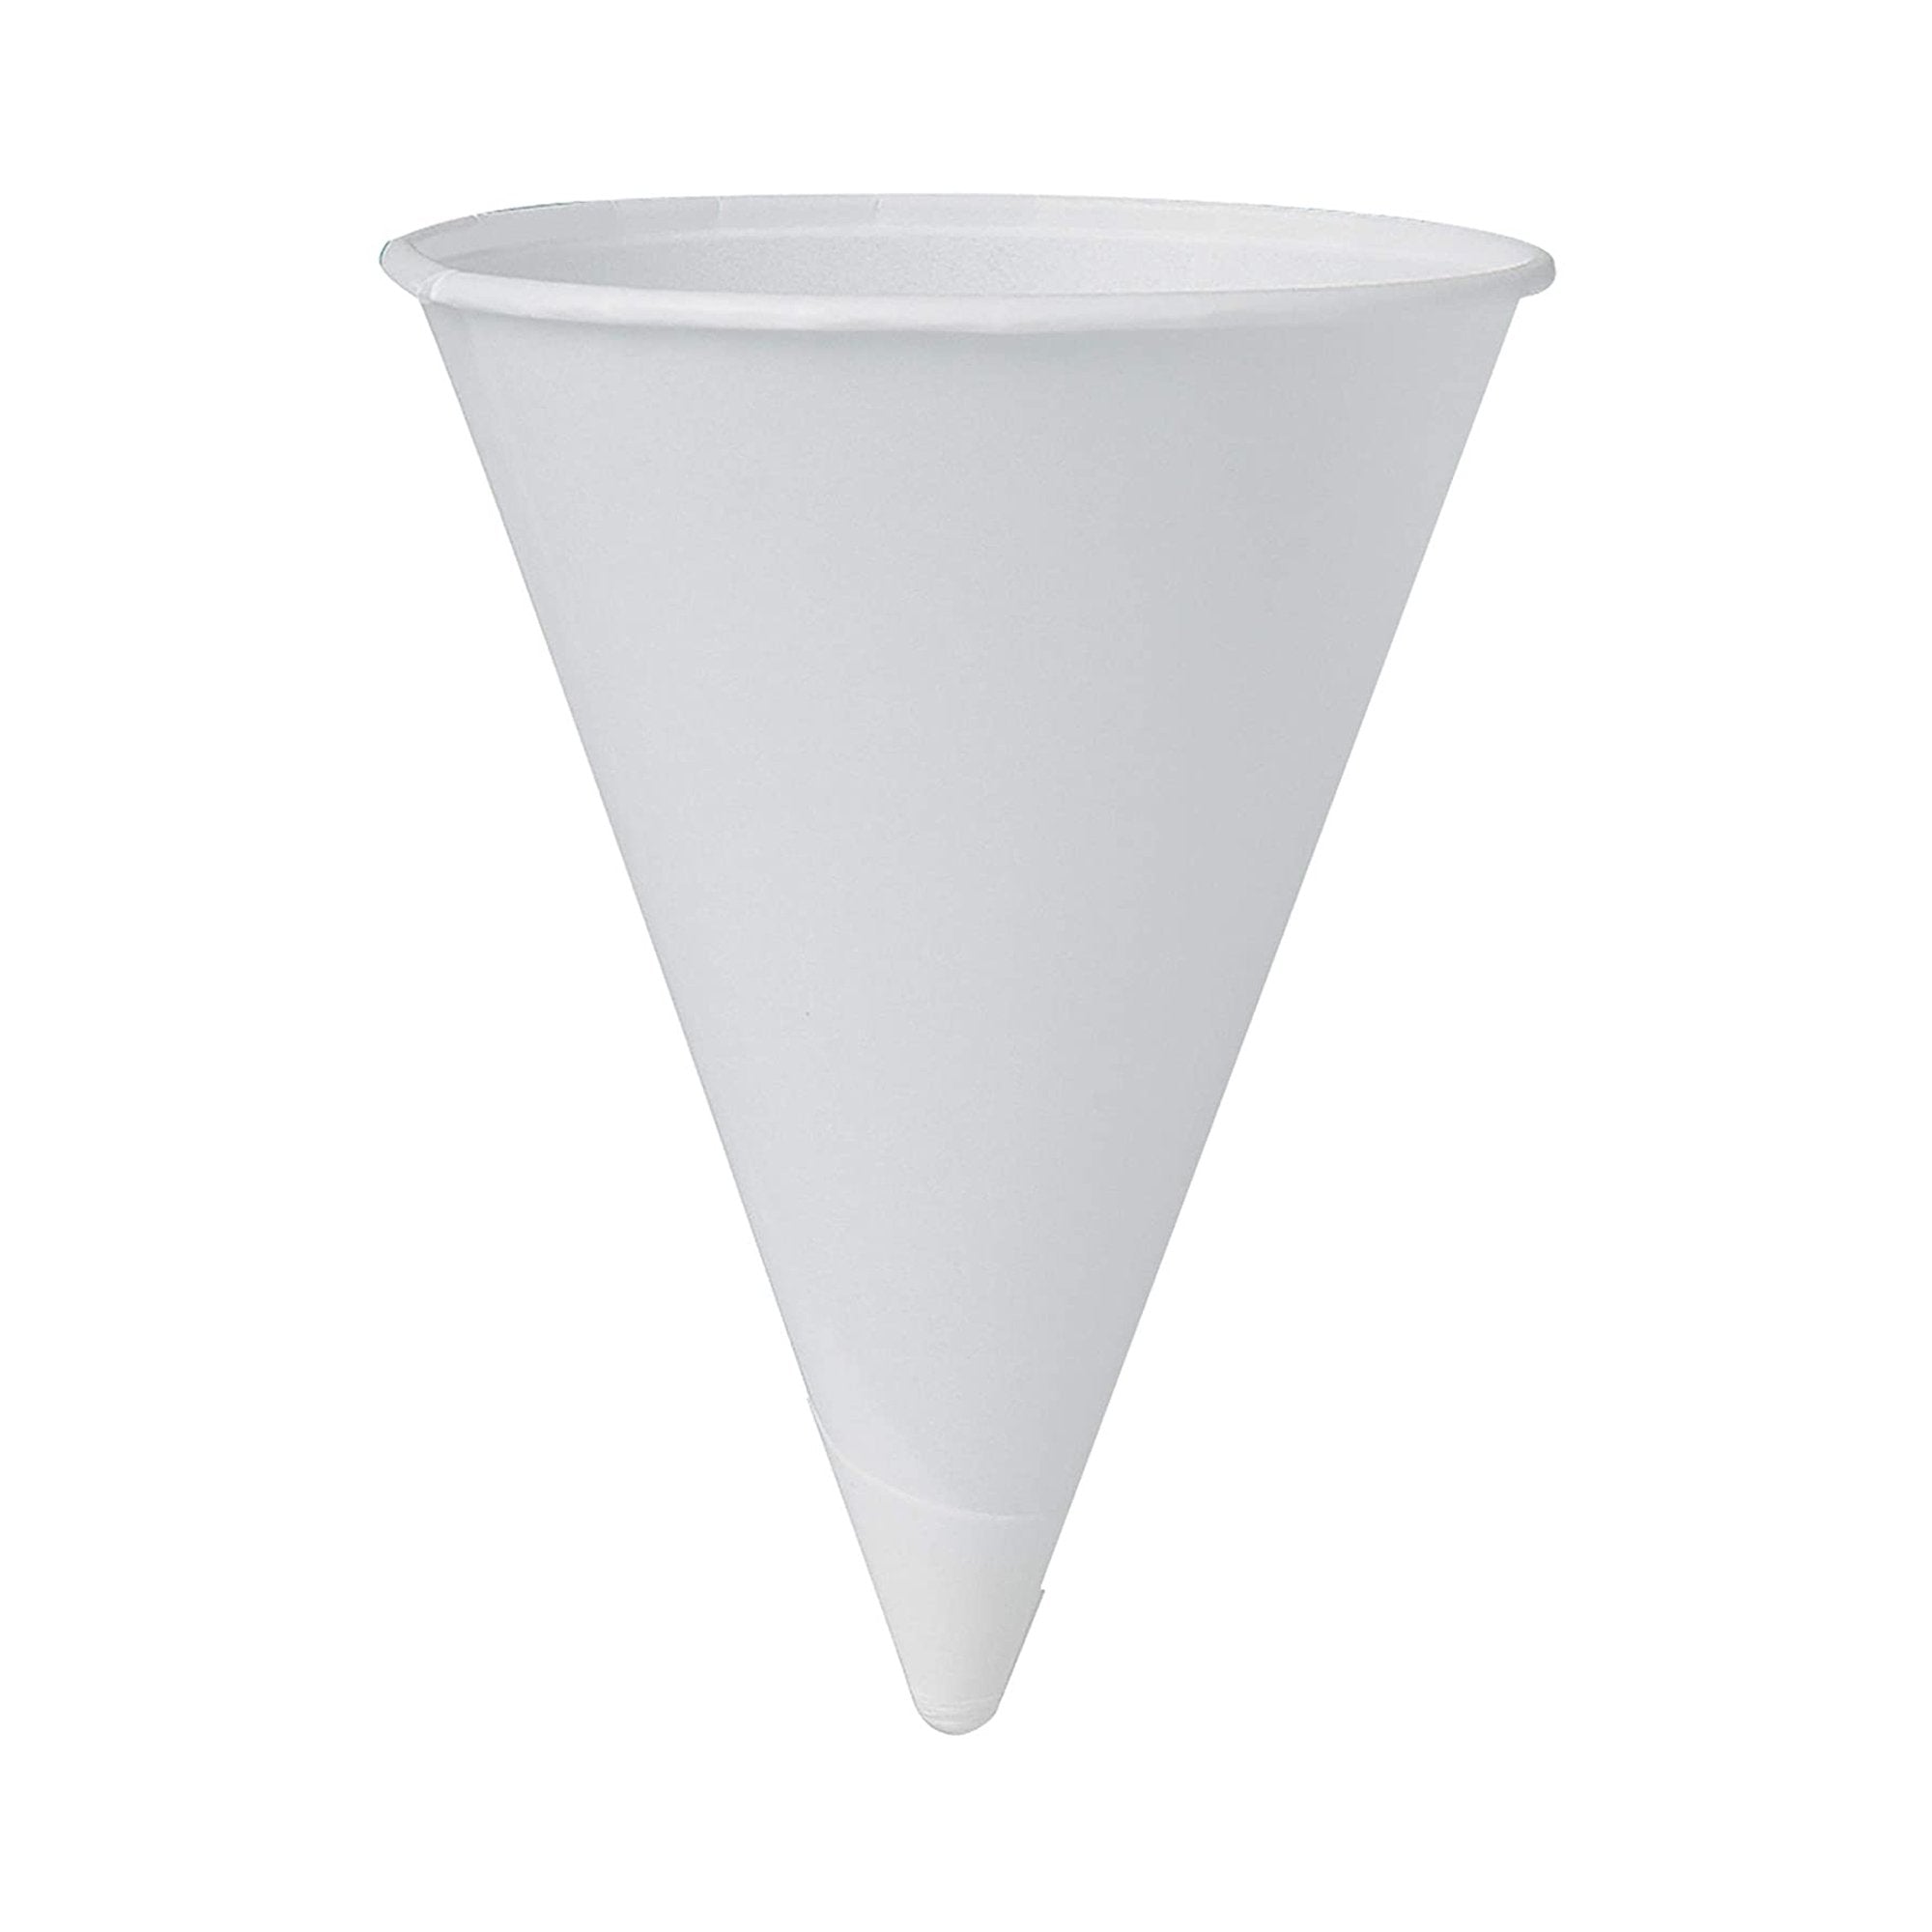 Drinking Cup Bare 4 oz. White Paper Disposable